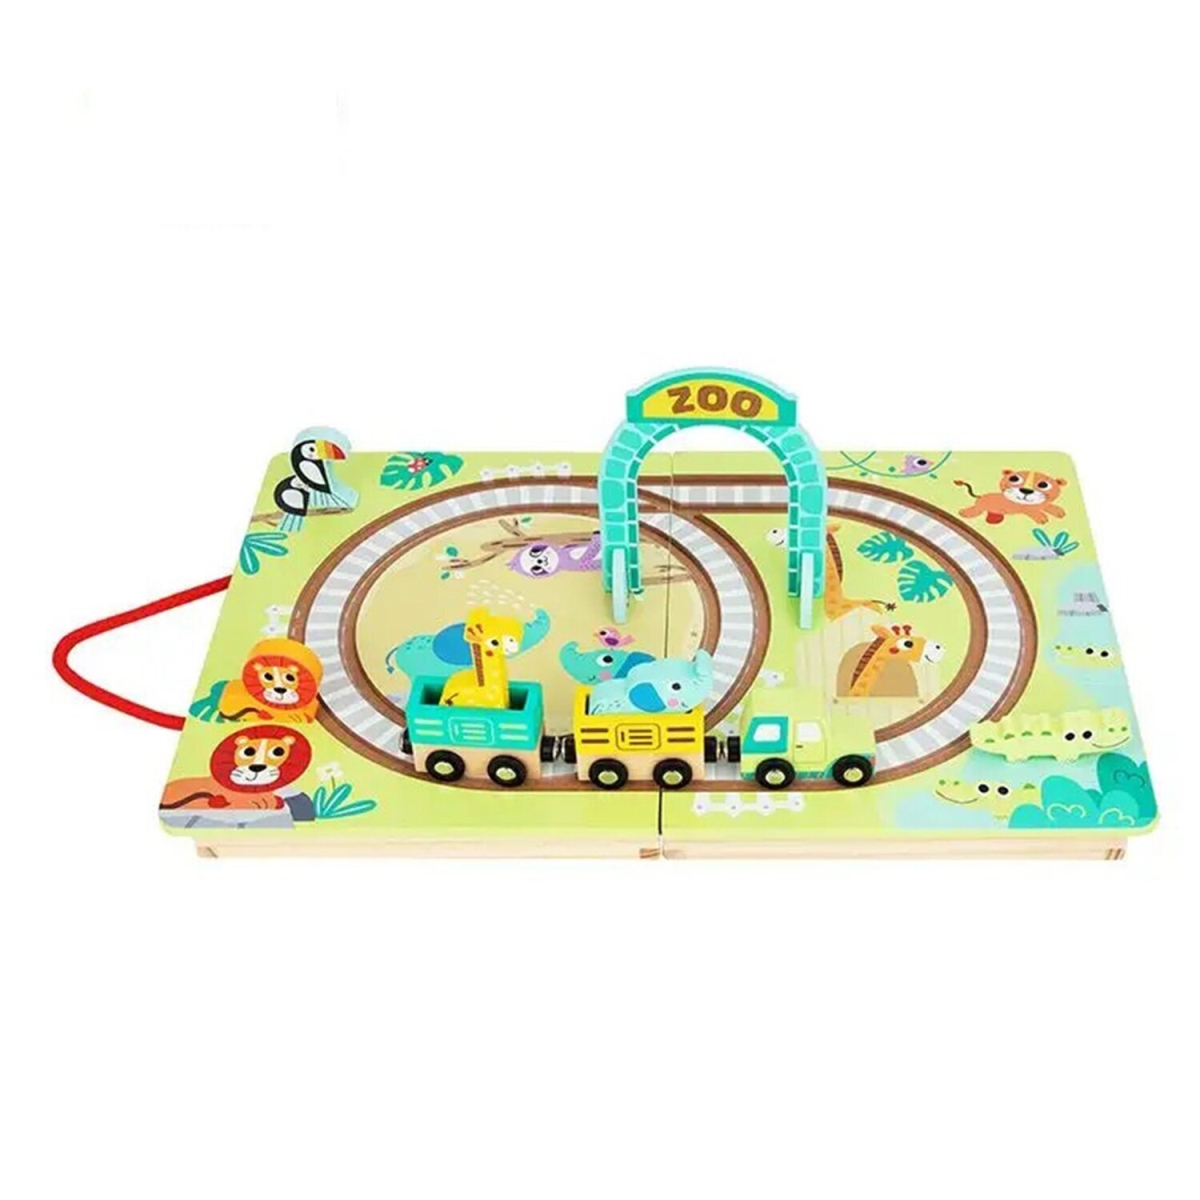 Picture of Tooky Toy 300349 30 x 24 x 6 cm Tabletop Railroad Zoo